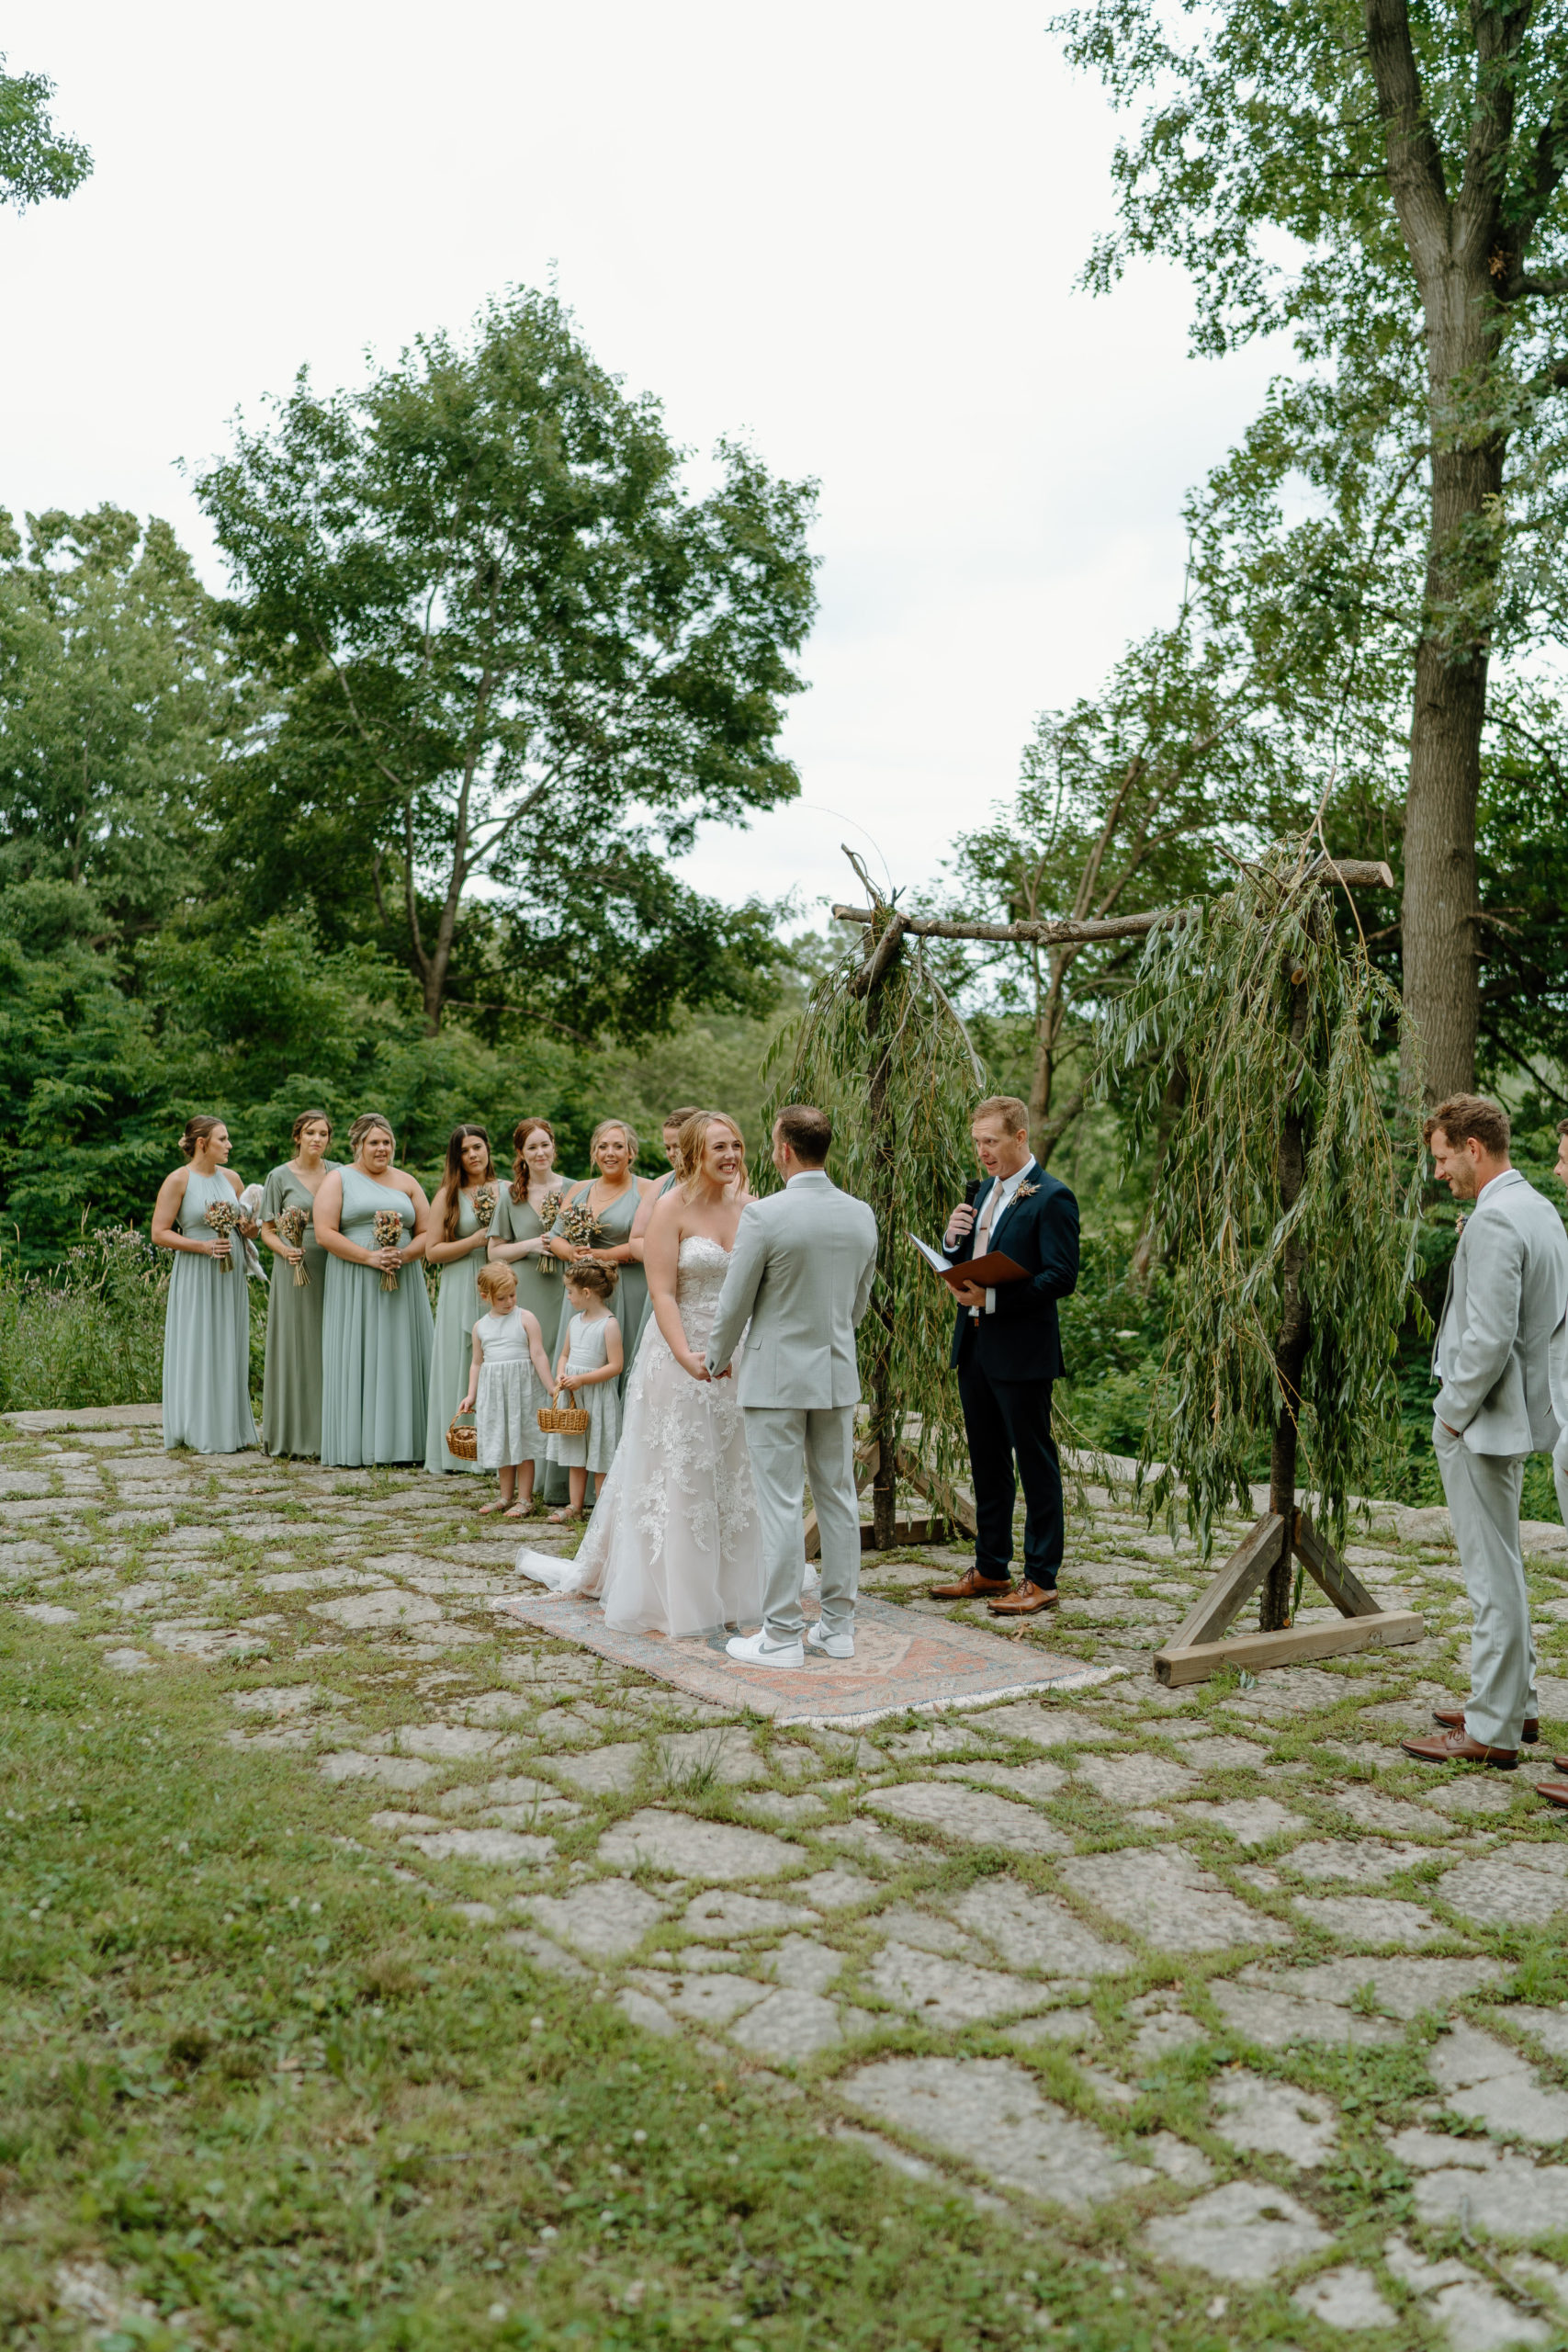 This is a wedding ceremony taking place at Indian Creek Nature Center in Cedar Rapids, IA